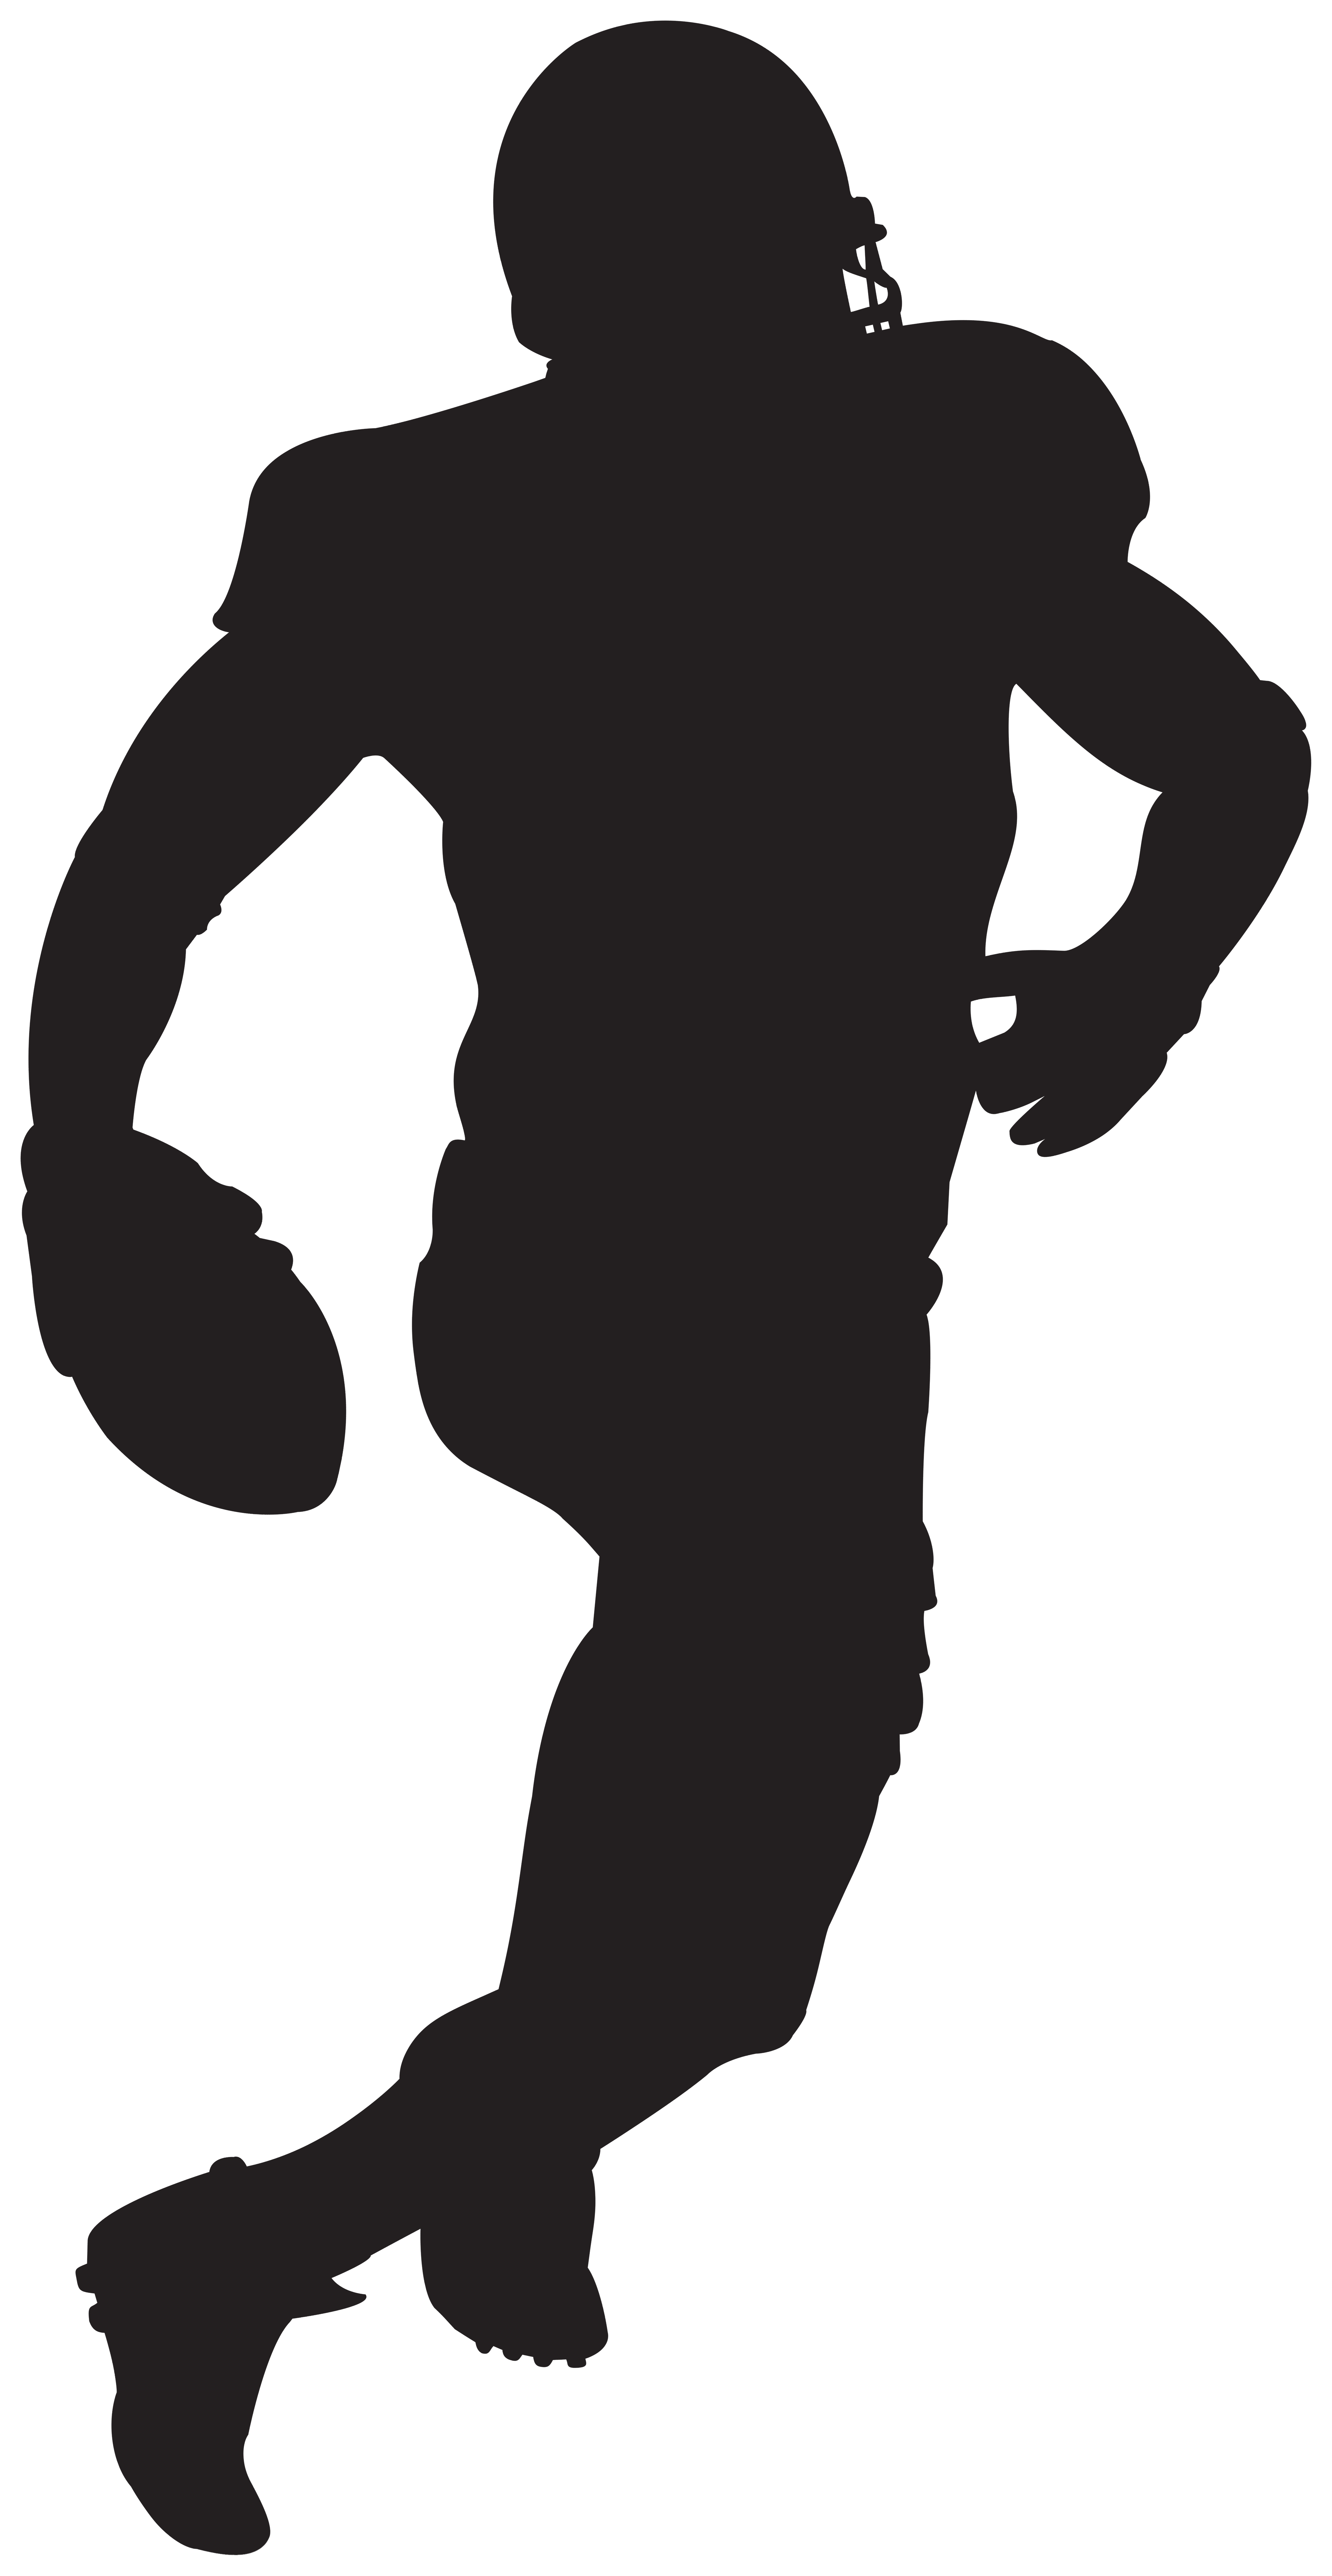 American Football Player Silhouette Transparent Image.